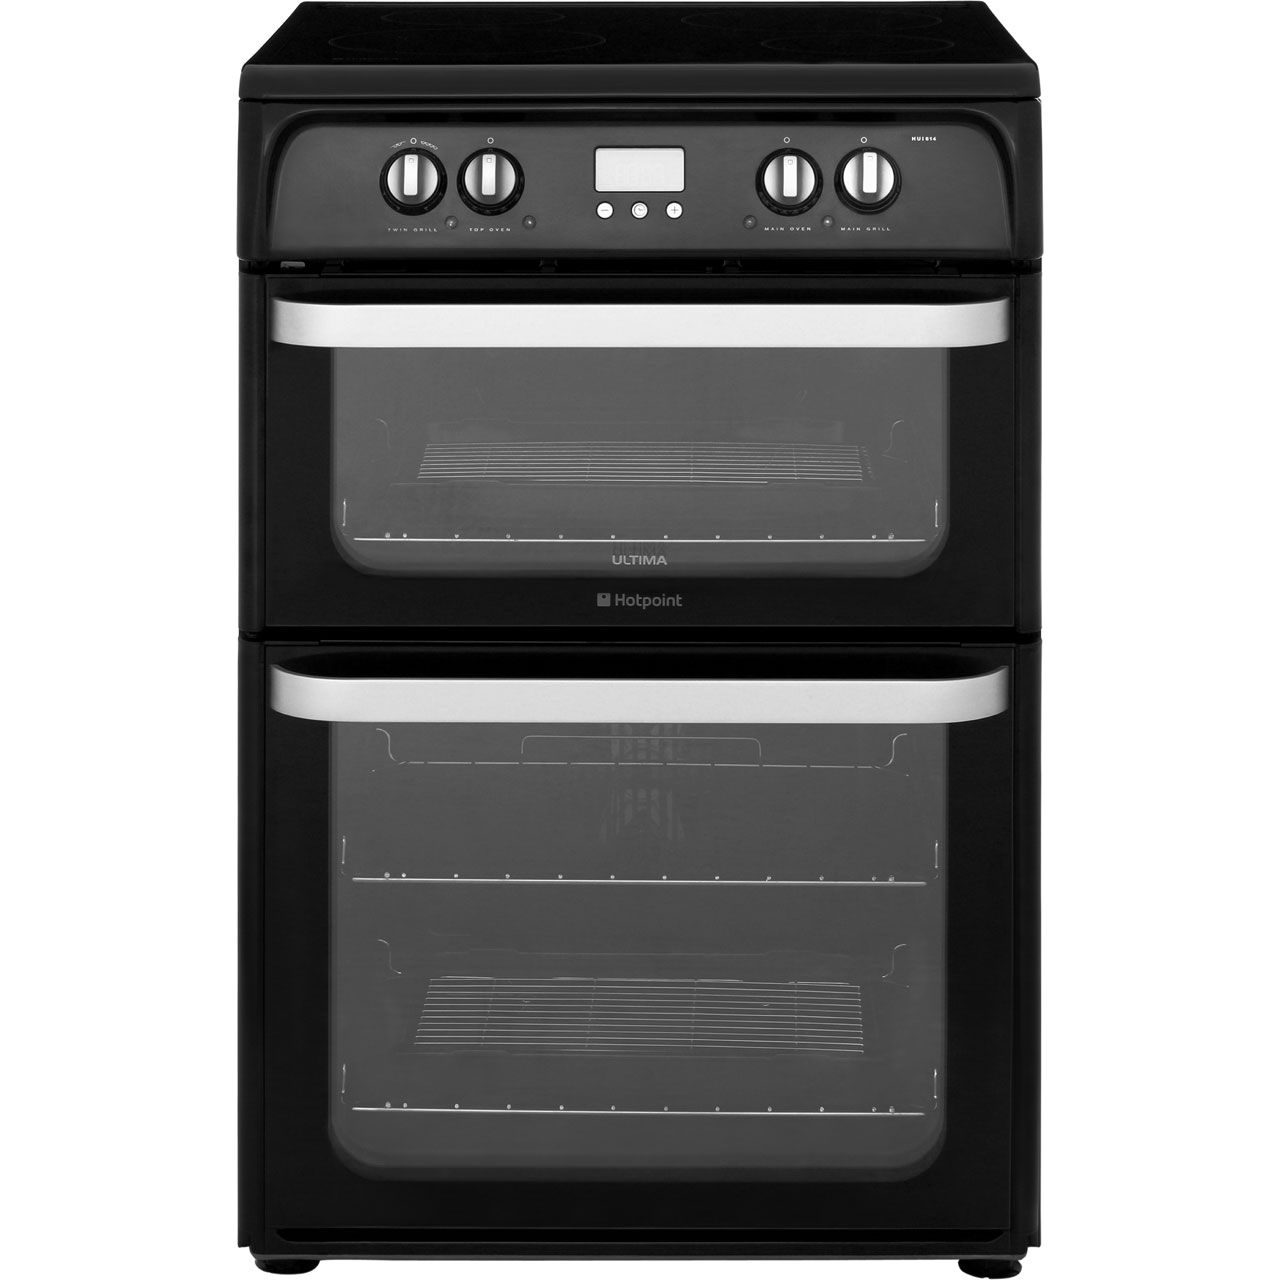 Hotpoint Ultima HUI614K 60cm Electric Cooker with Induction Hob Review